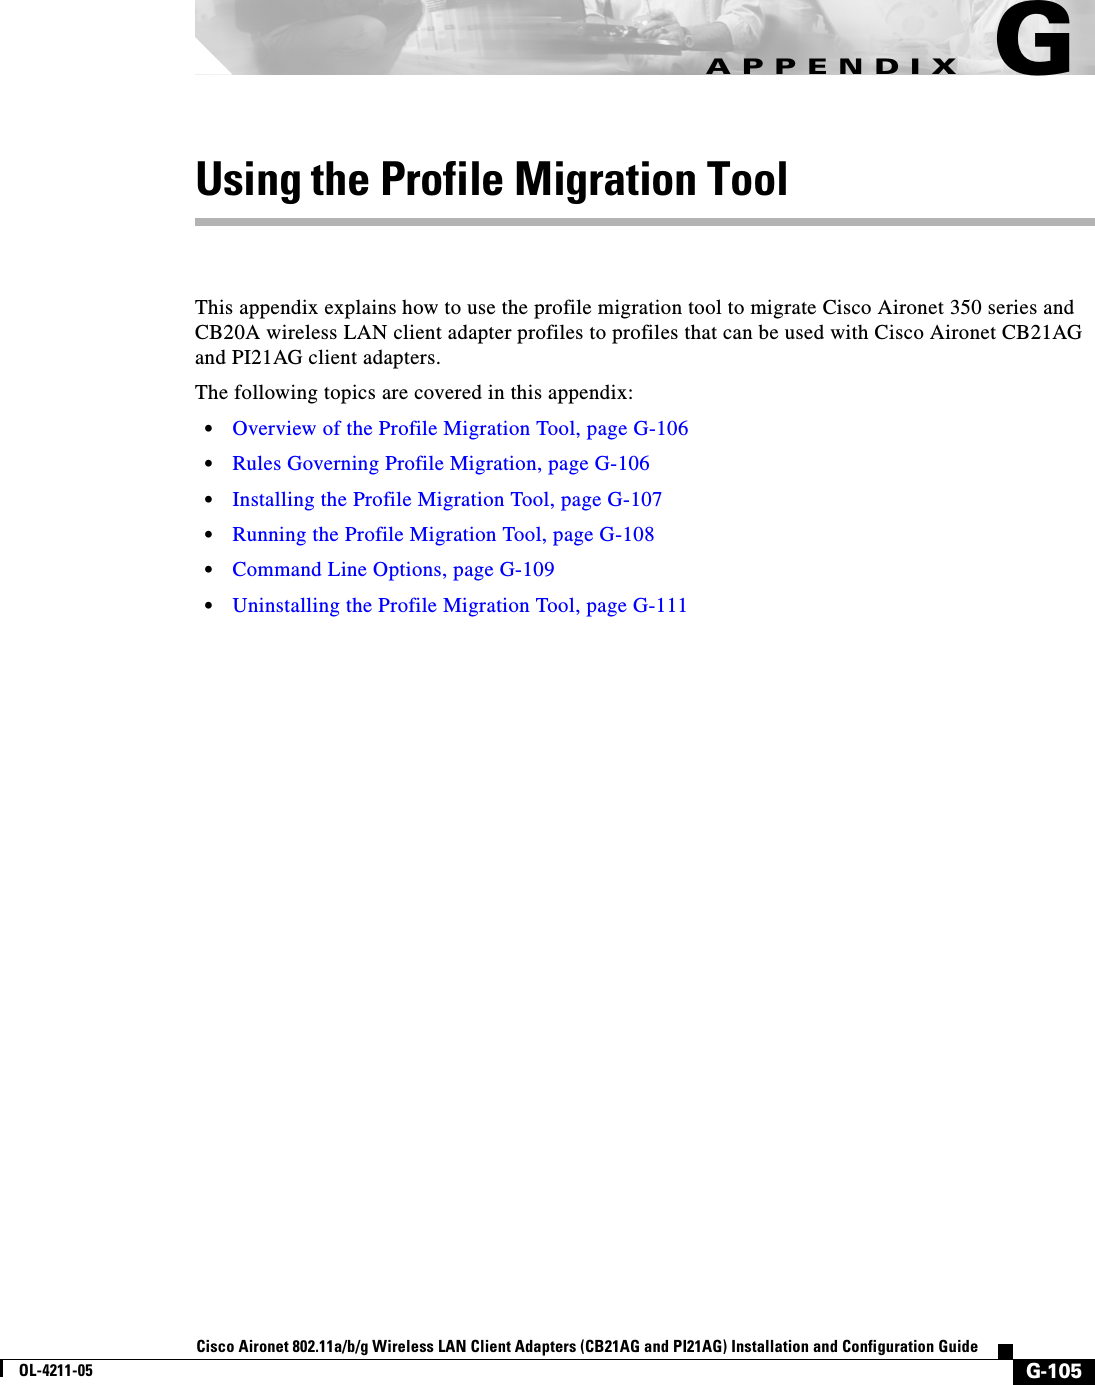 G-105Cisco Aironet 802.11a/b/g Wireless LAN Client Adapters (CB21AG and PI21AG) Installation and Configuration GuideOL-4211-05APPENDIXGUsing the Profile Migration ToolThis appendix explains how to use the profile migration tool to migrate Cisco Aironet 350 series and CB20A wireless LAN client adapter profiles to profiles that can be used with Cisco Aironet CB21AG and PI21AG client adapters.The following topics are covered in this appendix:•Overview of the Profile Migration Tool, page G-106•Rules Governing Profile Migration, page G-106•Installing the Profile Migration Tool, page G-107•Running the Profile Migration Tool, page G-108•Command Line Options, page G-109•Uninstalling the Profile Migration Tool, page G-111